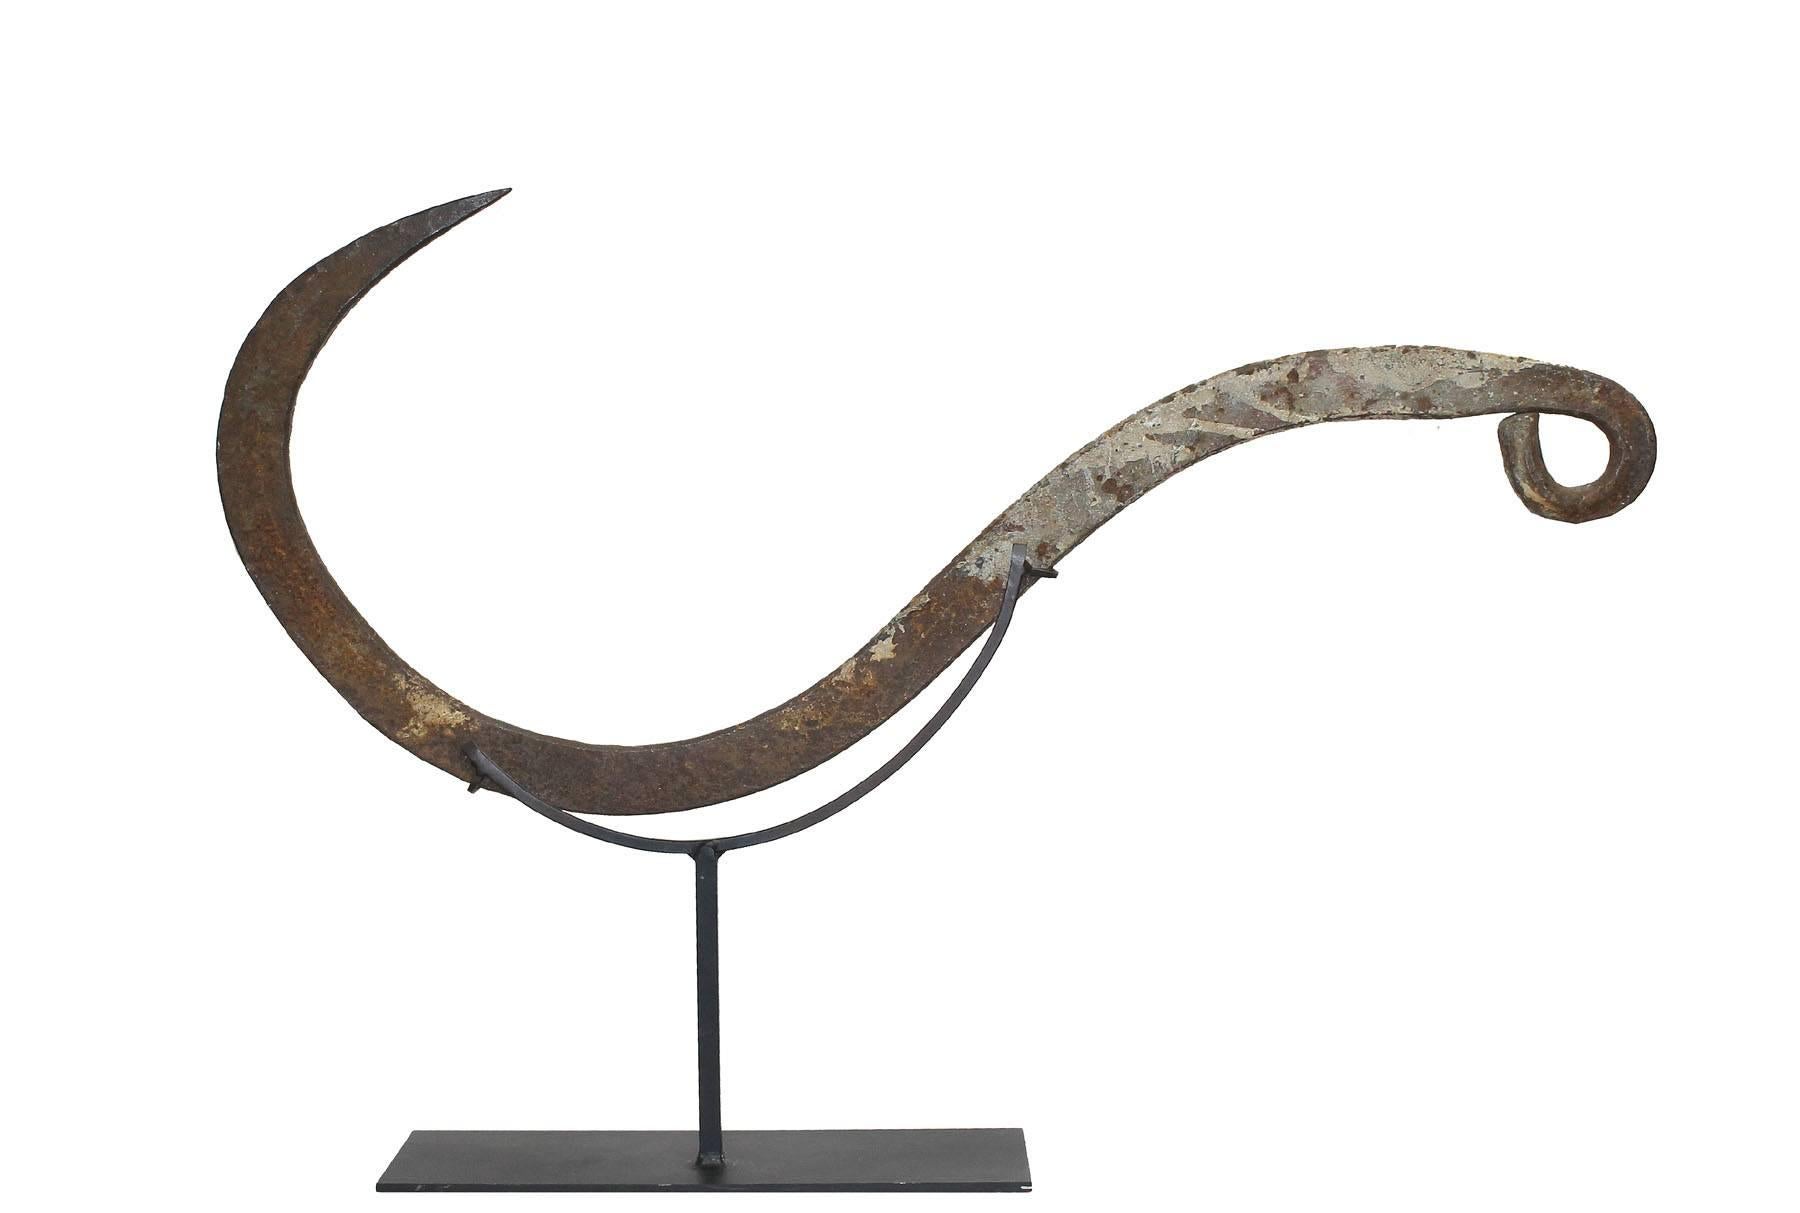 These kinds of hooks were used to load old cargo ships. The hooks would be used to grasp large nets made of rope and load onto large sail ships. This piece is mounted on a Stand and is an usual conversation piece. Large hook with a great patina